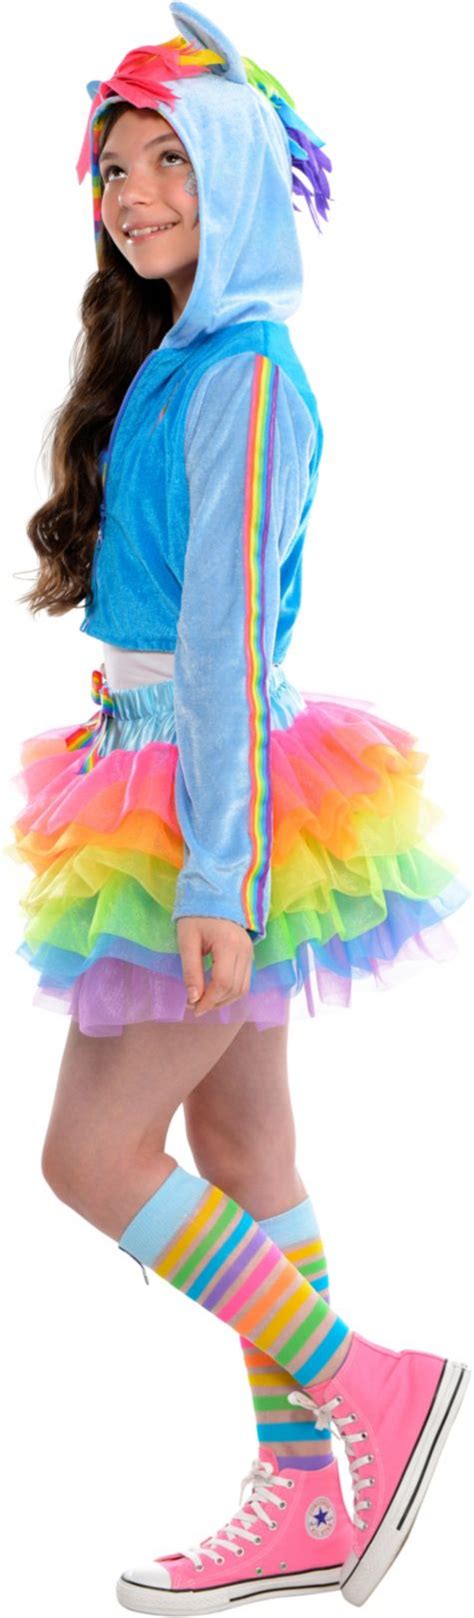 The show follows a studious unicorn pony named twilight sparkle as her mentor princess celestia guides her to learn about friendship in the town of ponyville. Girls Trendy Rainbow Dash Costume - My Little Pony- Party City | Halloween costumes for girls ...